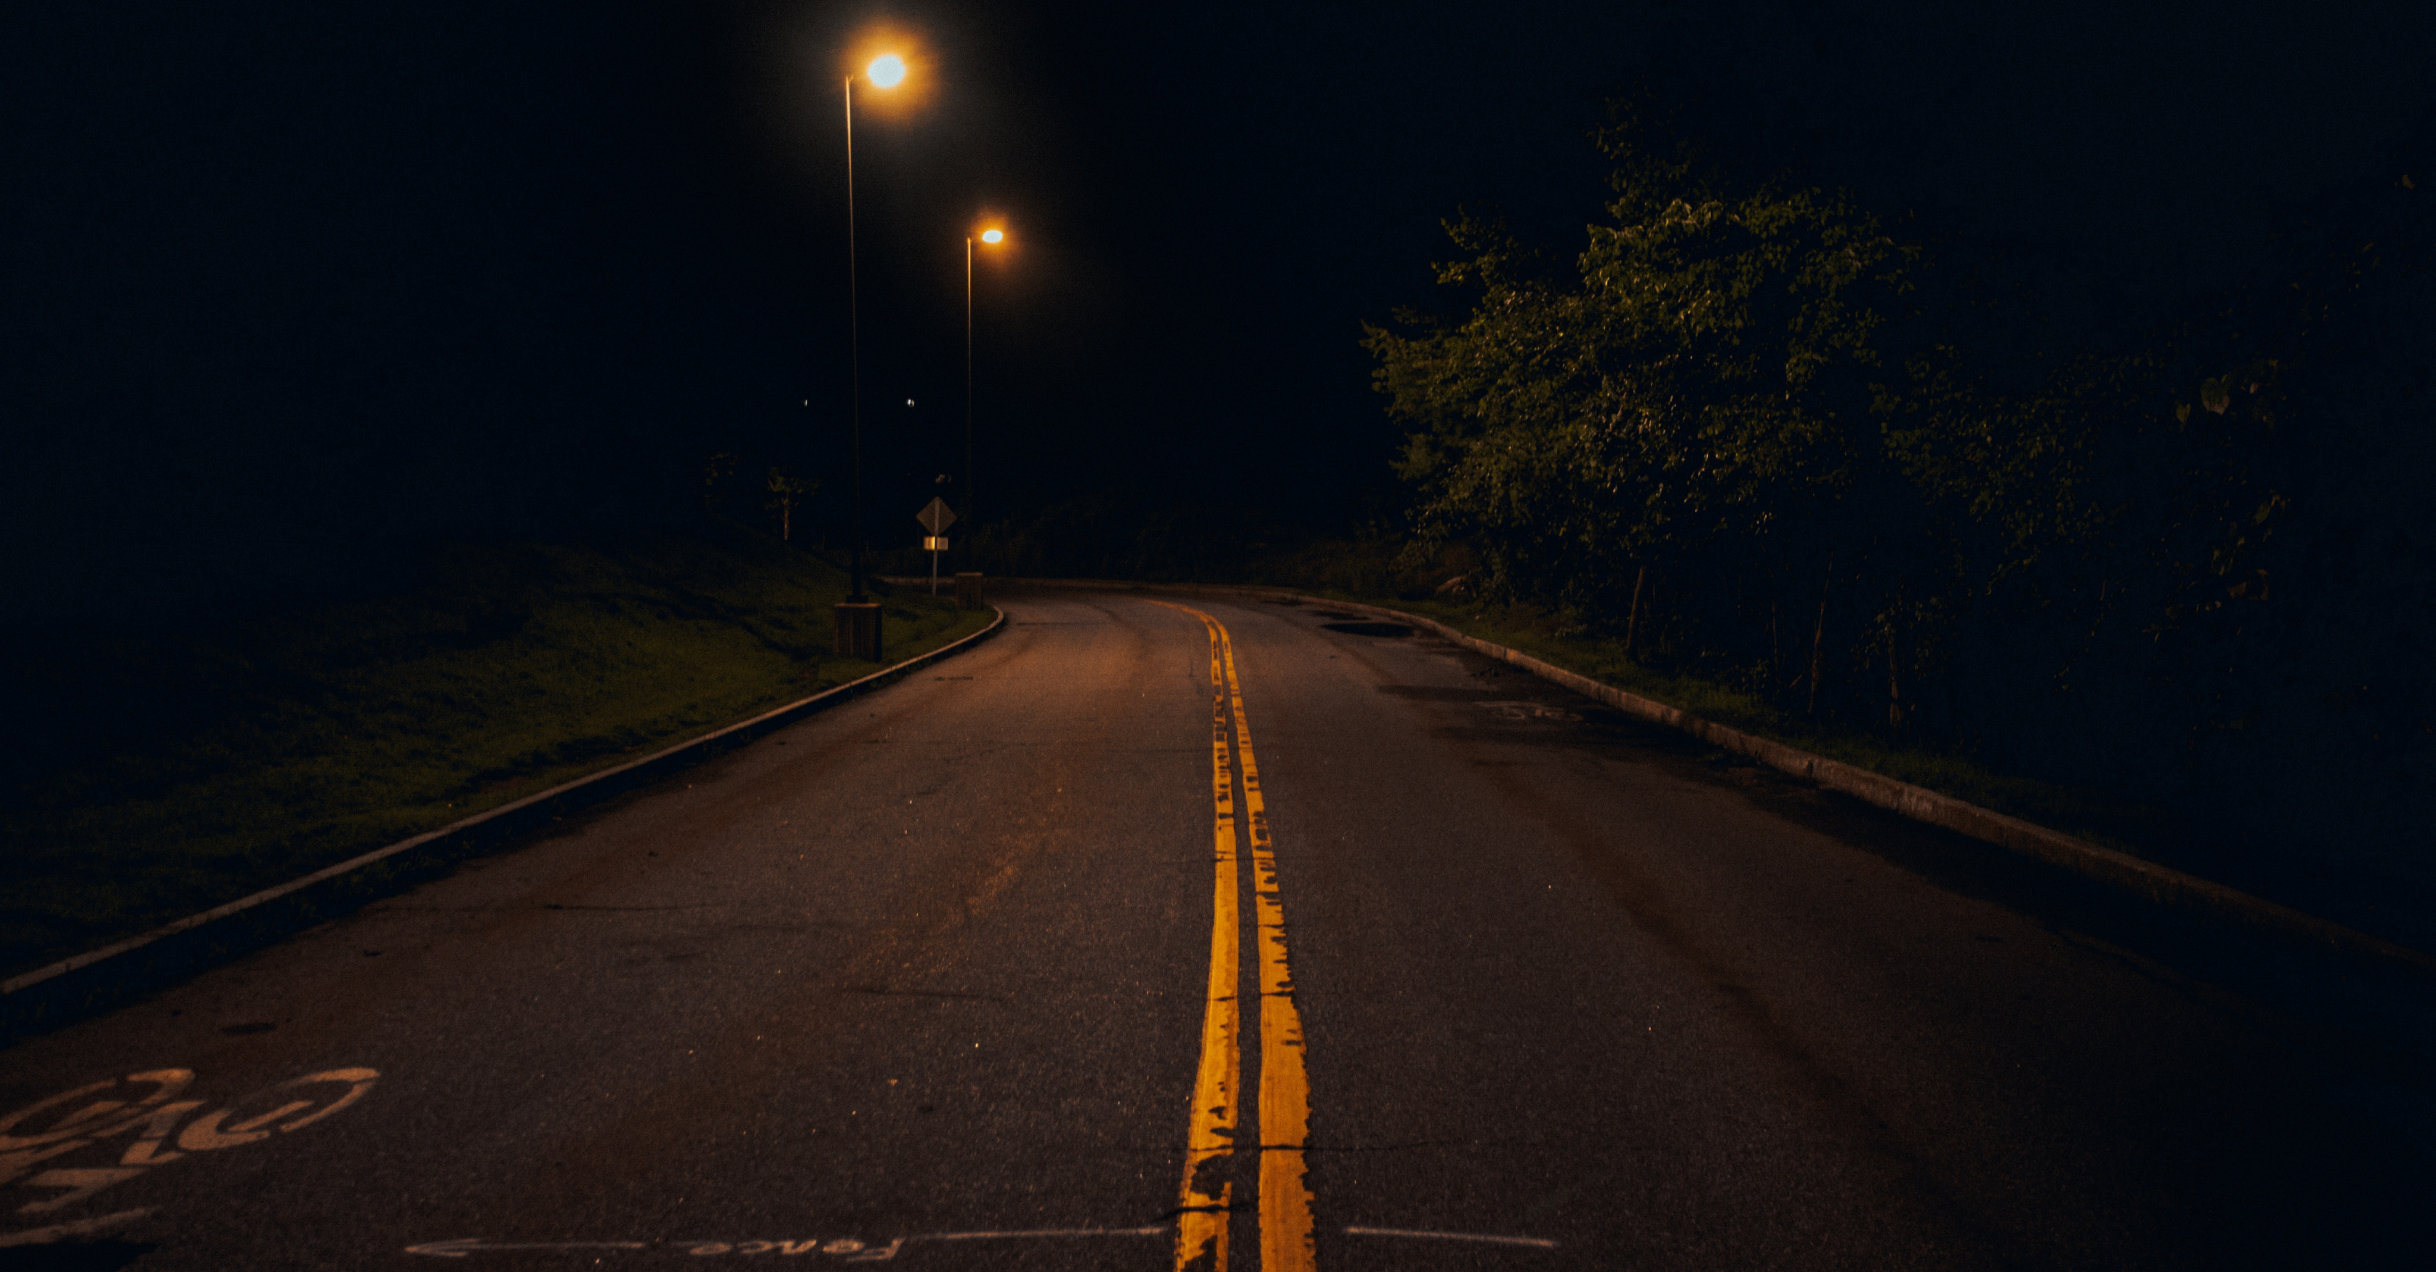 An Empty Road With Yellow Lines At Night.